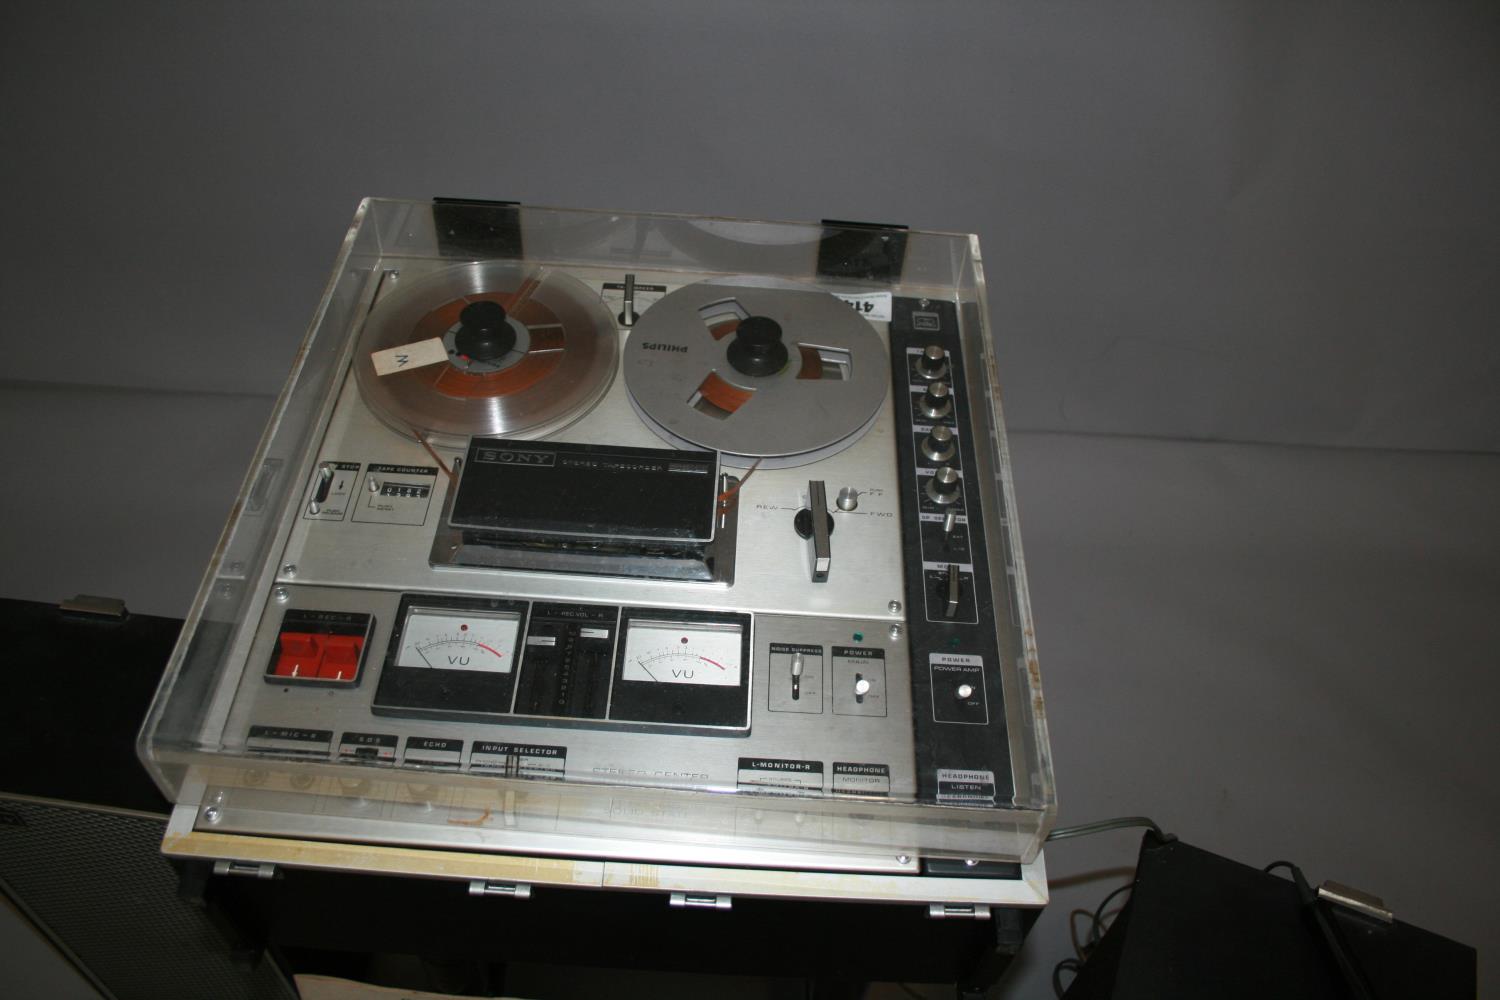 Sony stereo tape recorder TC - 630. 45W x 13H x 47D - Image 2 of 4